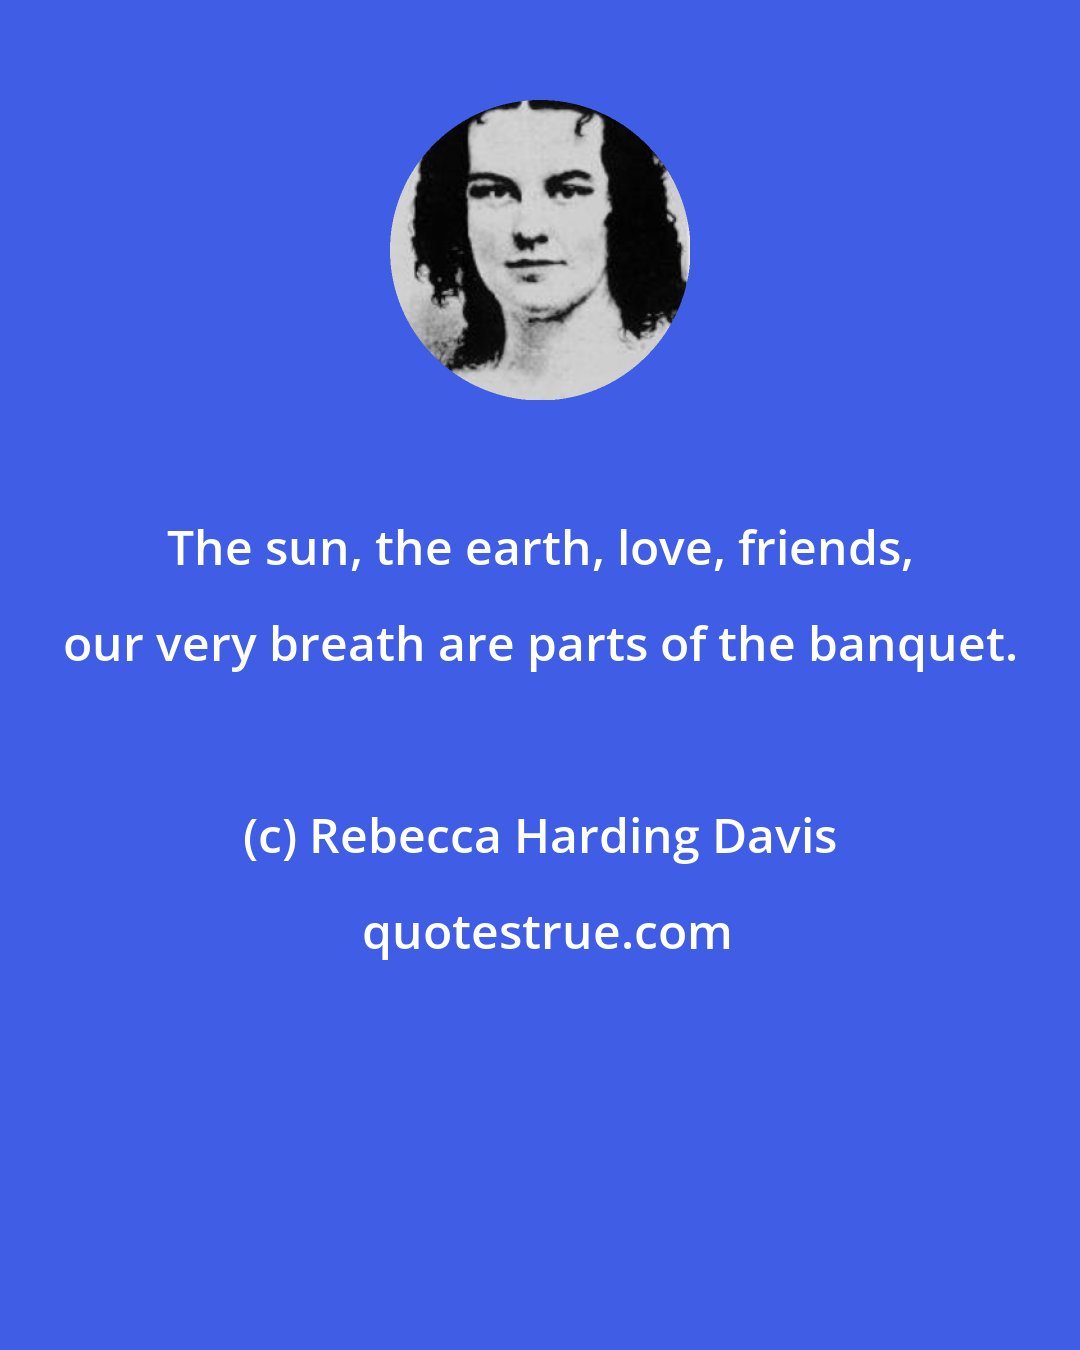 Rebecca Harding Davis: The sun, the earth, love, friends, our very breath are parts of the banquet.